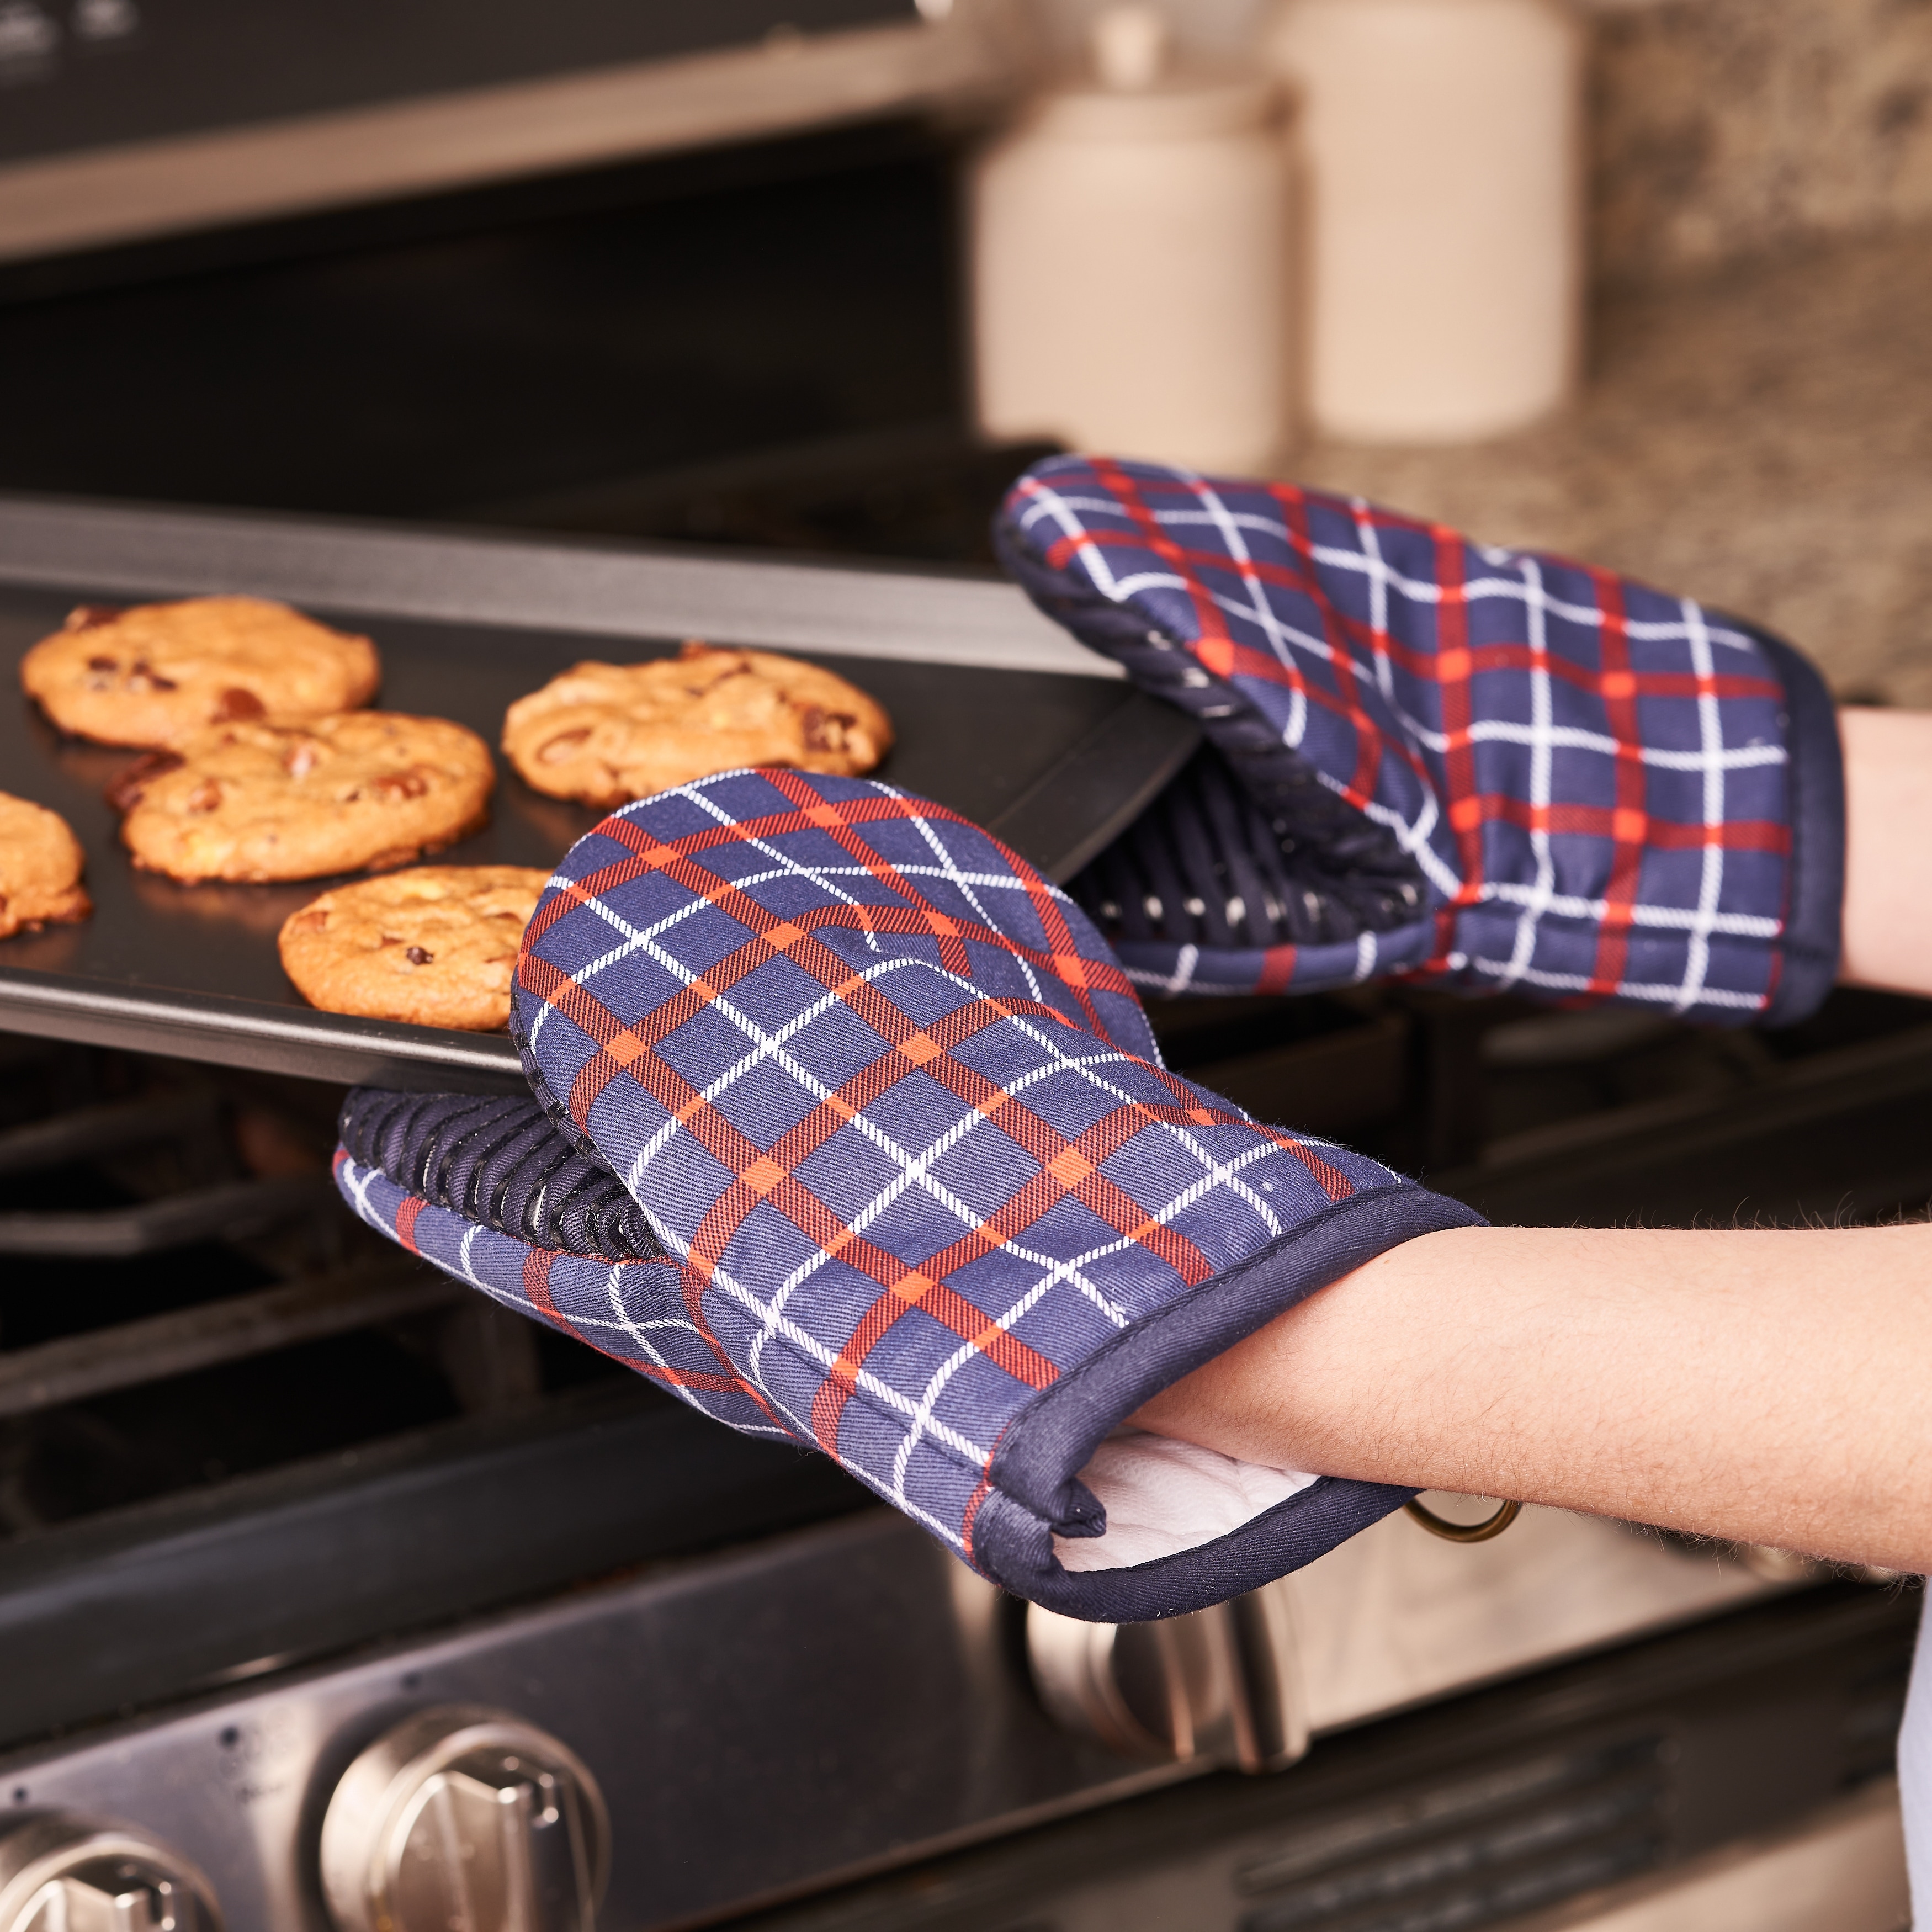 Grey 100% Cotton Oven Mitts With Silicone Palm (Set of 2)